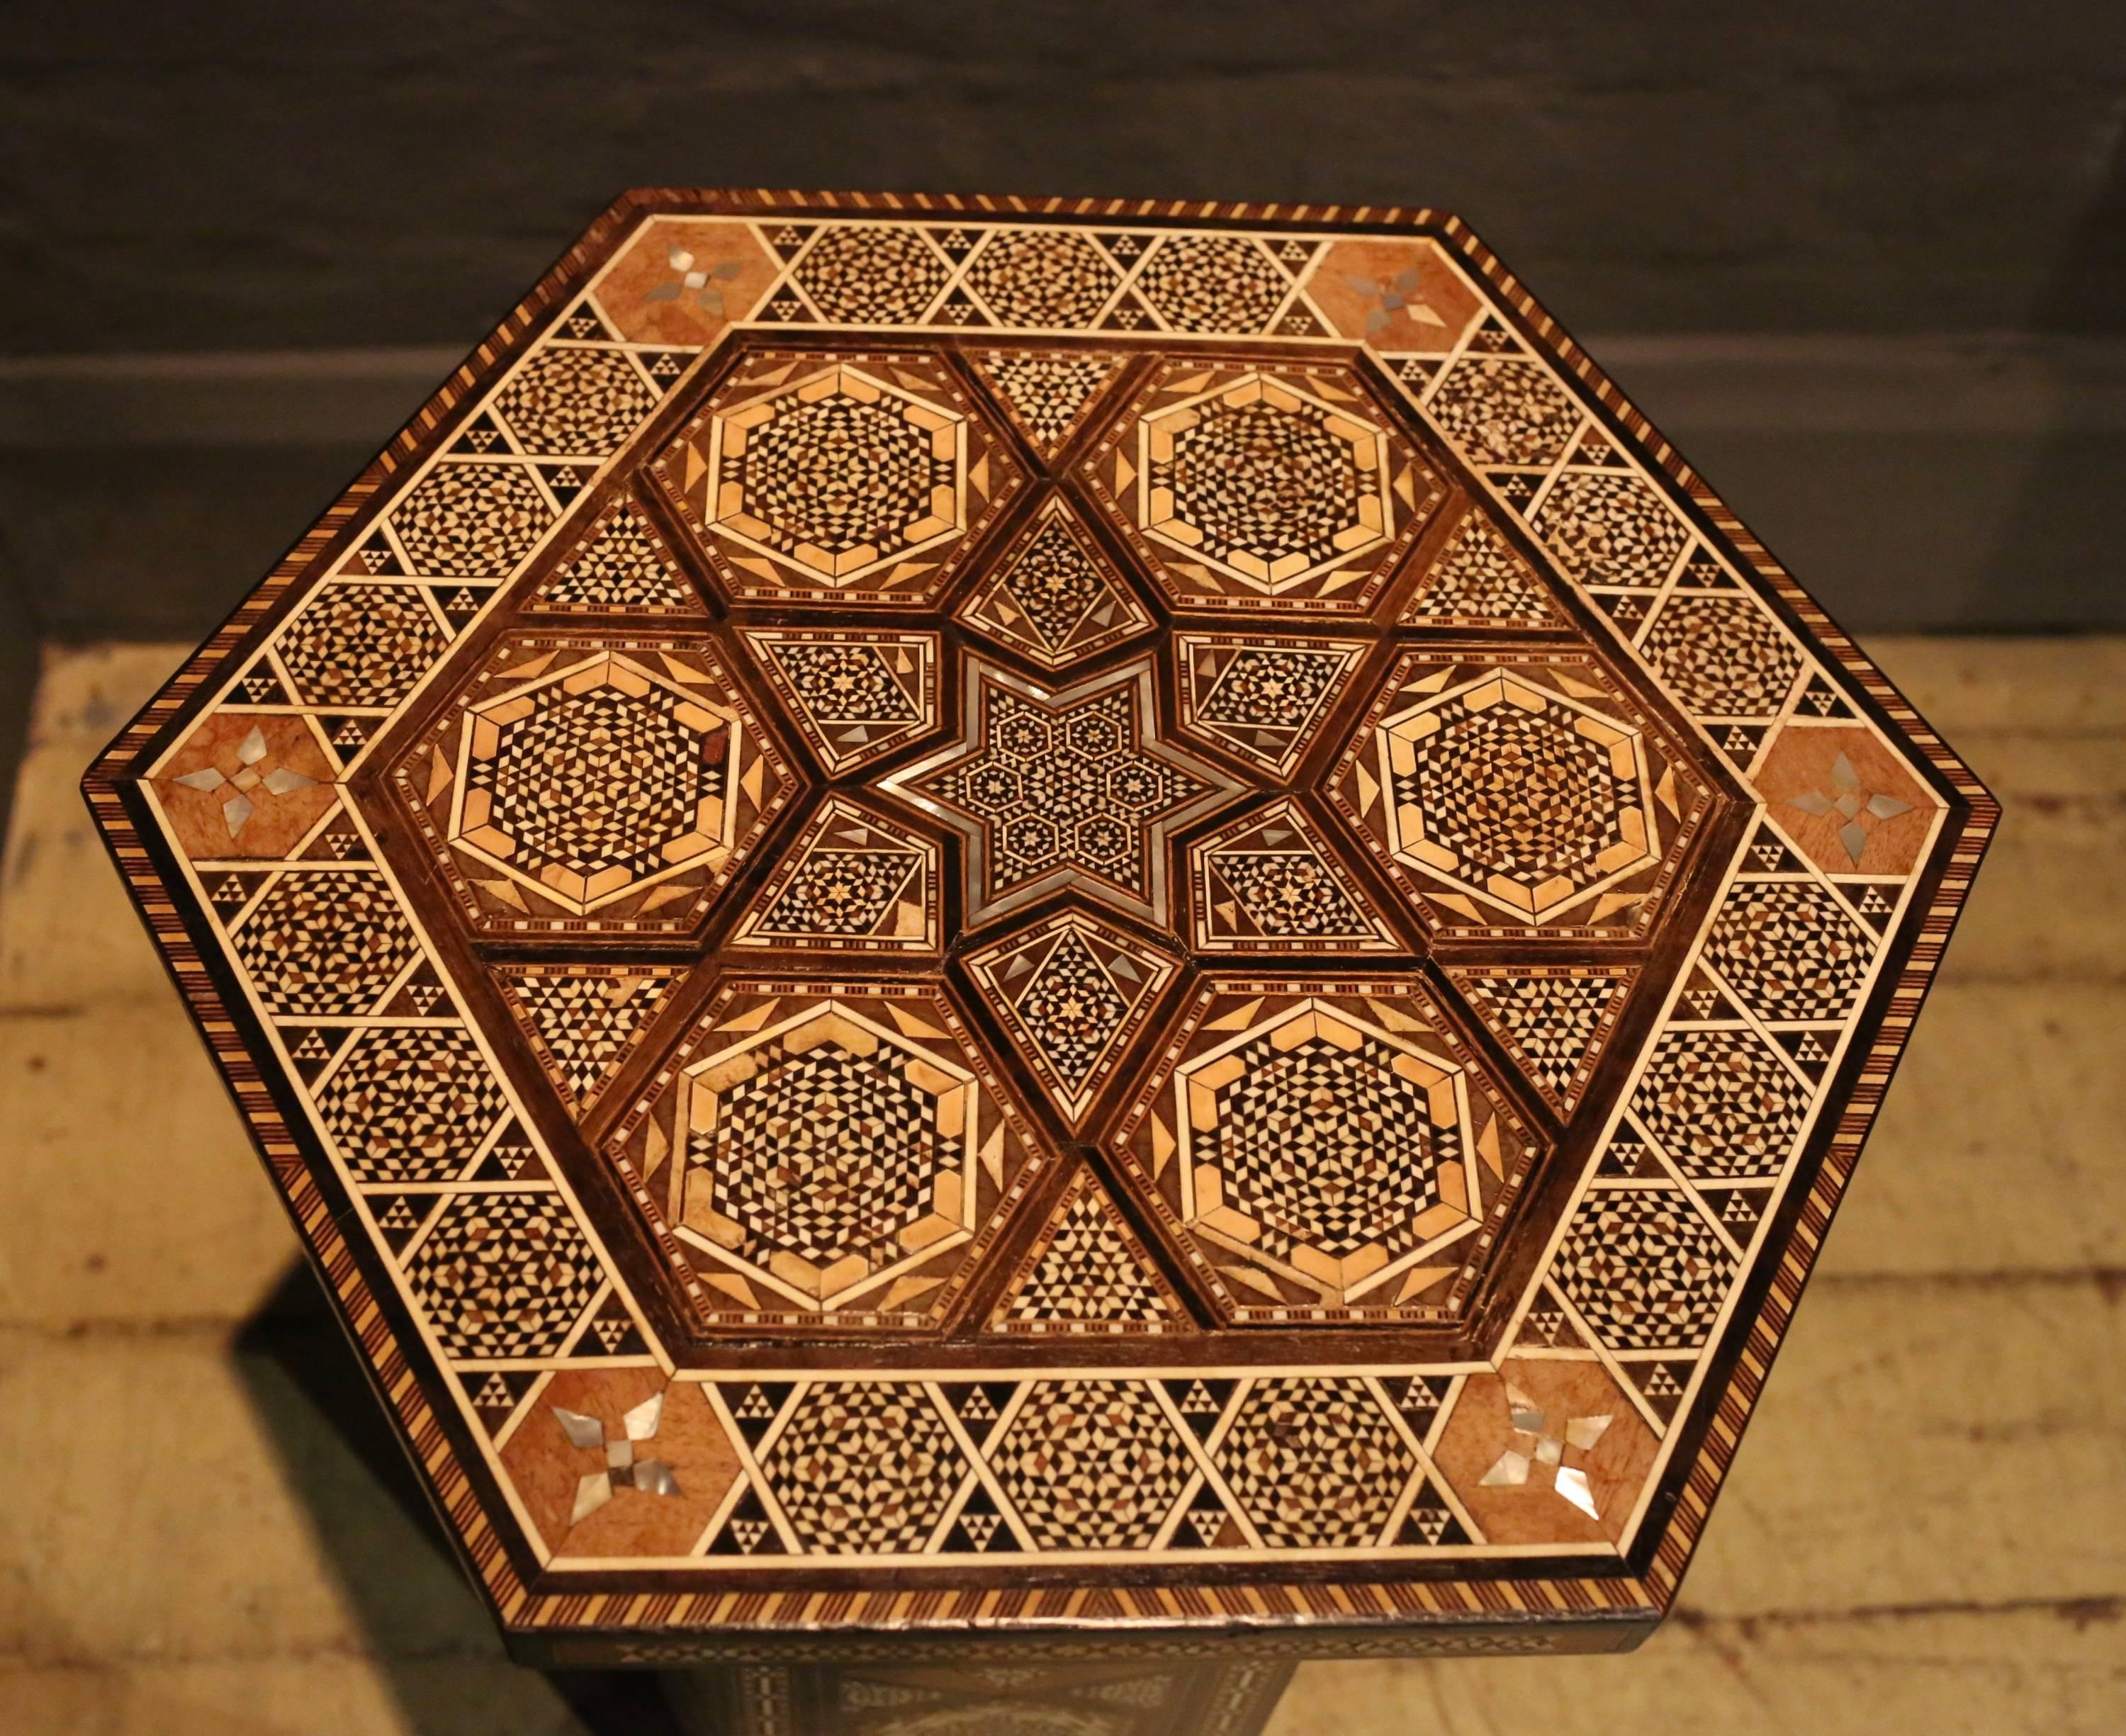 A very fine quality early 20th century Syrian parquetry inlaid hexagonal occasional table. Veneered all over in a micromosaic type geometric parquetry design in specimen wood, bone and mother of pearl. With a hidden 